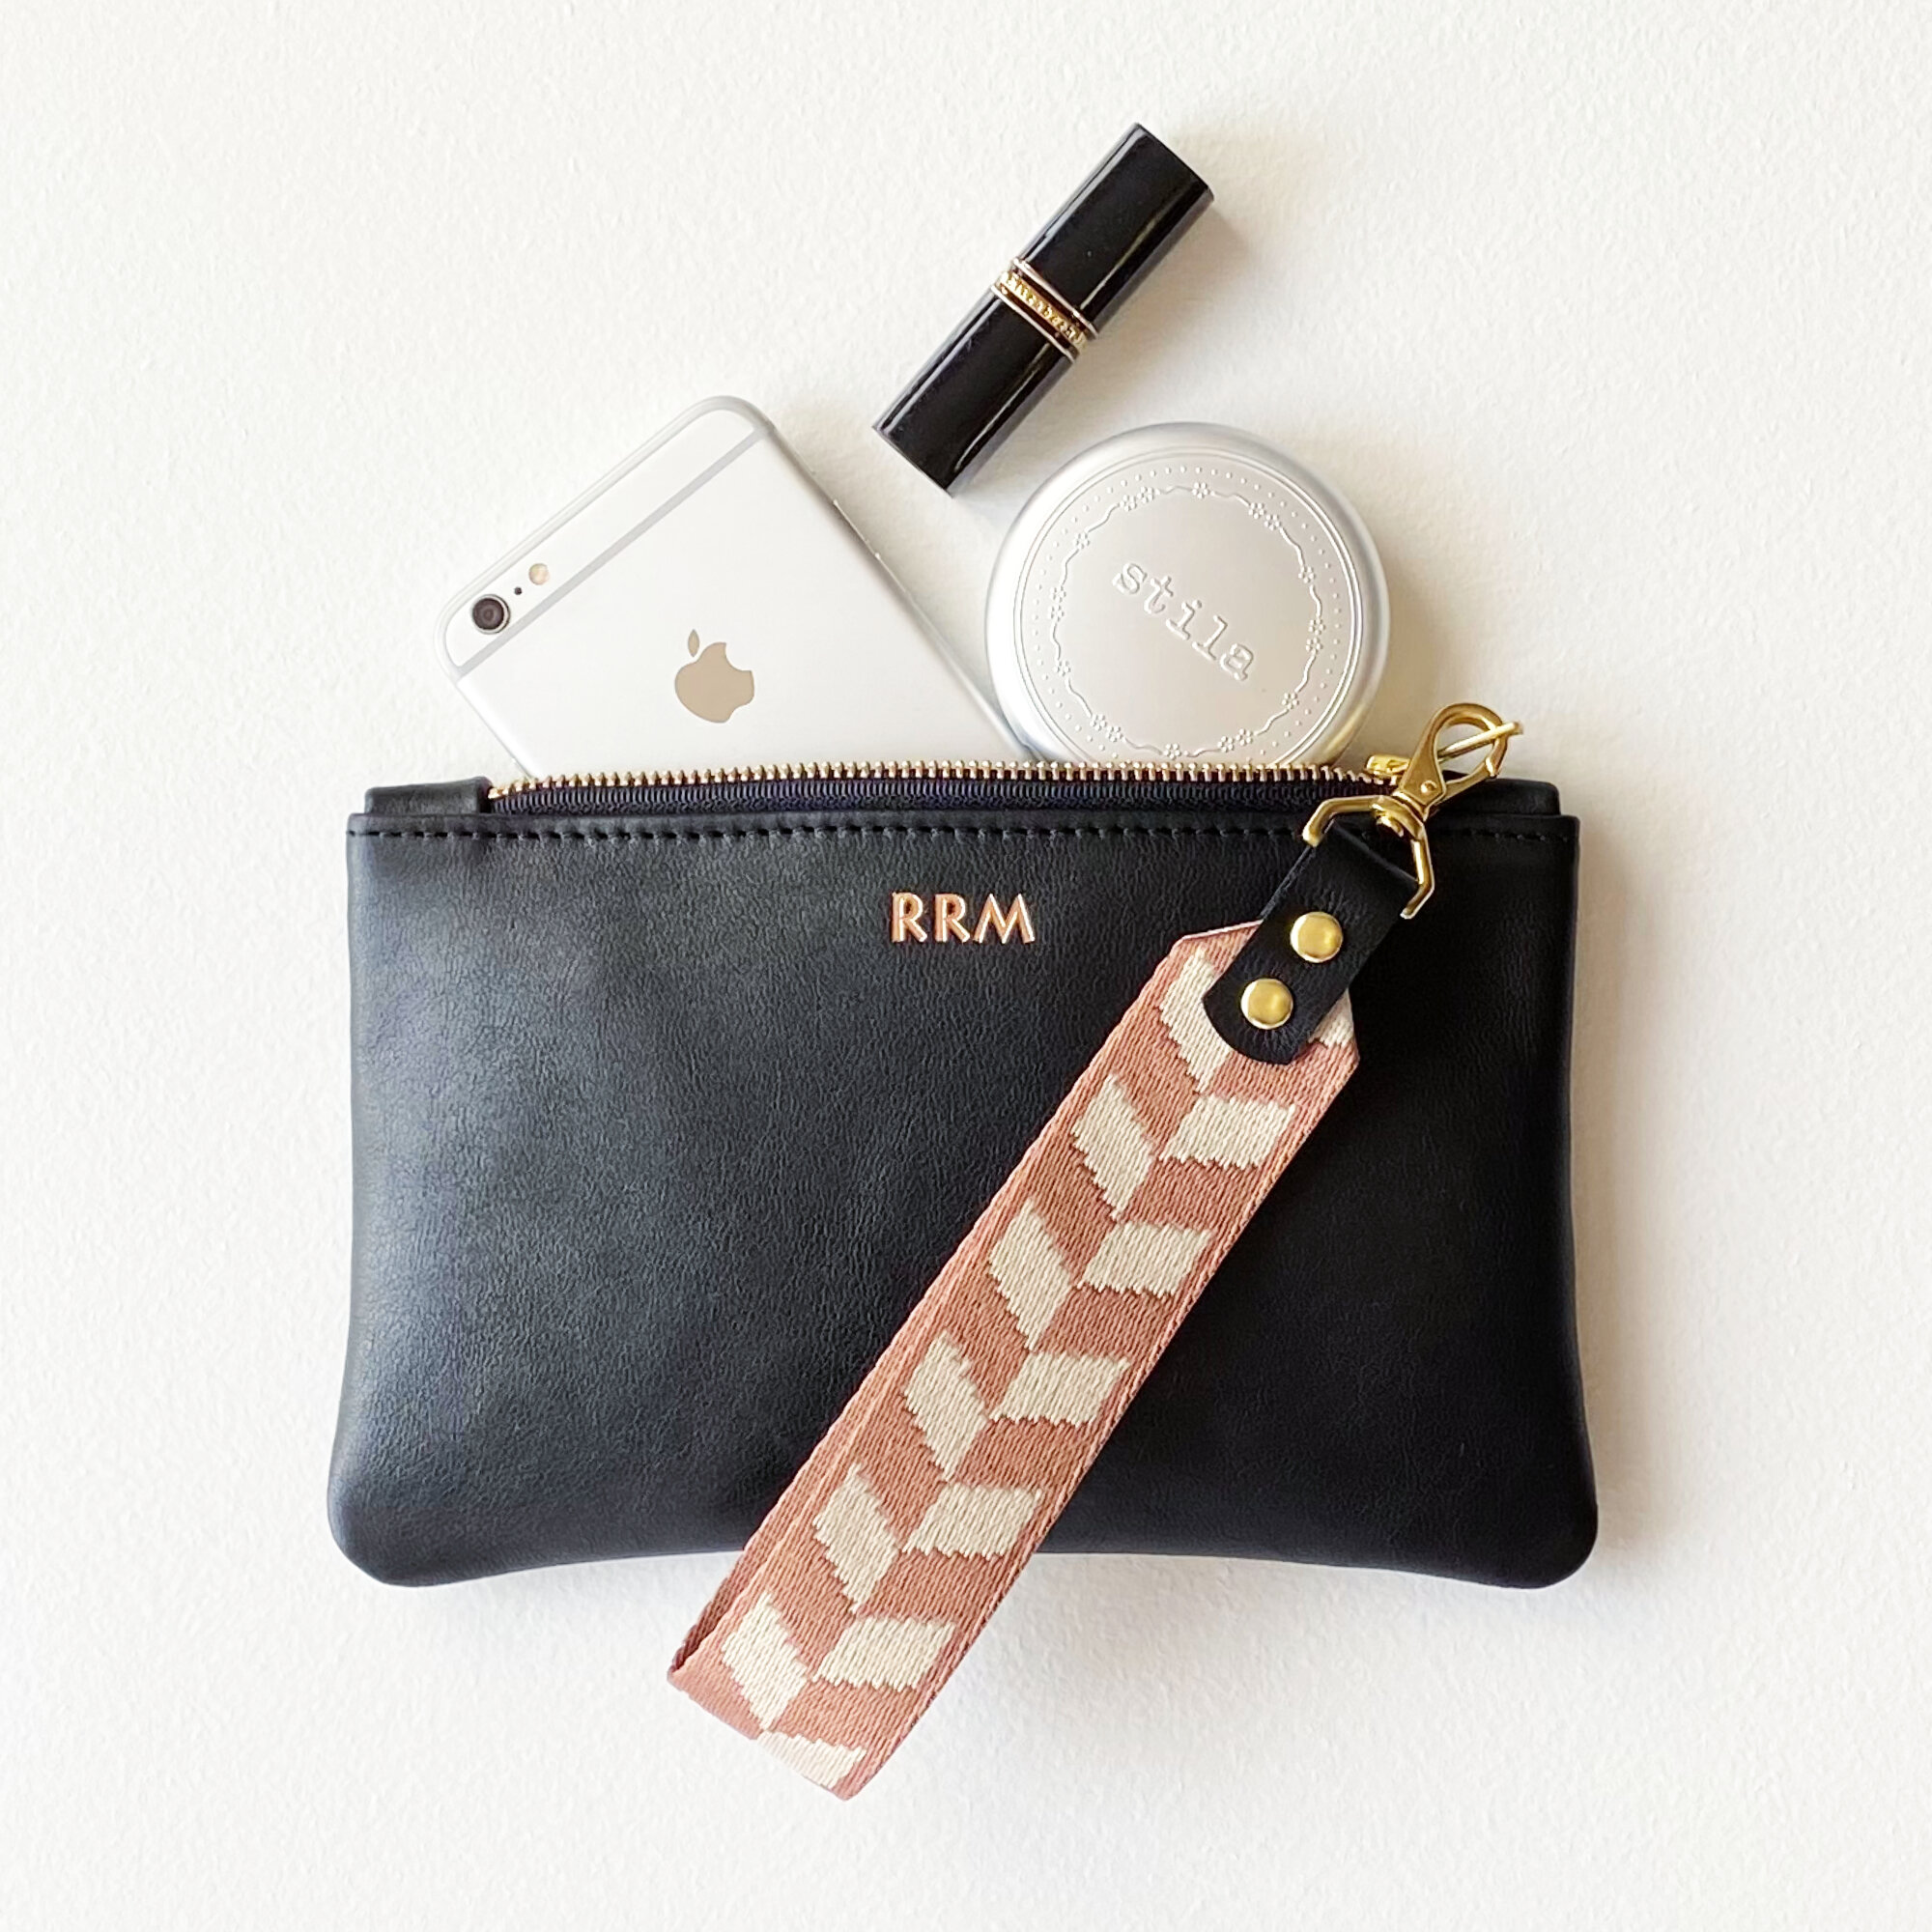 monogram leather pouch